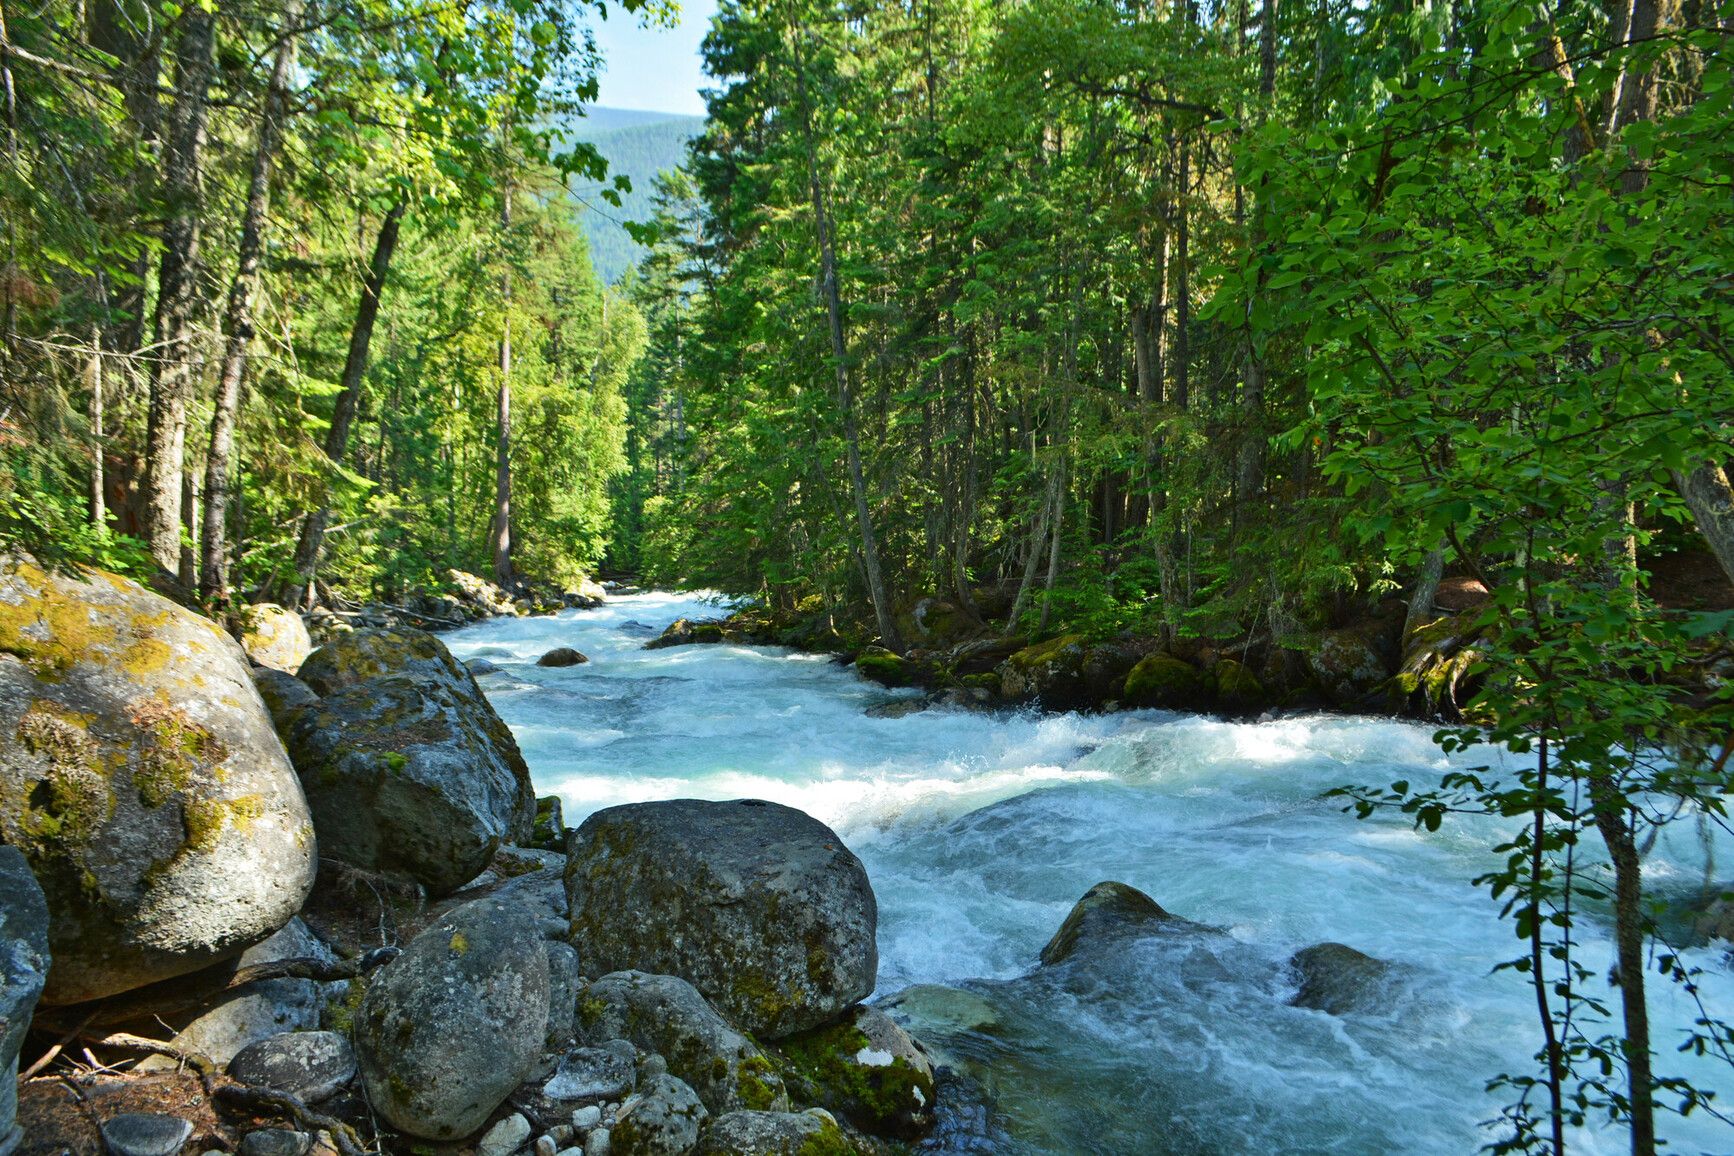 Experience the mesmerizing rush of Kokanee Creek, as its powerful currents flow through the lush forest.&nbsp;